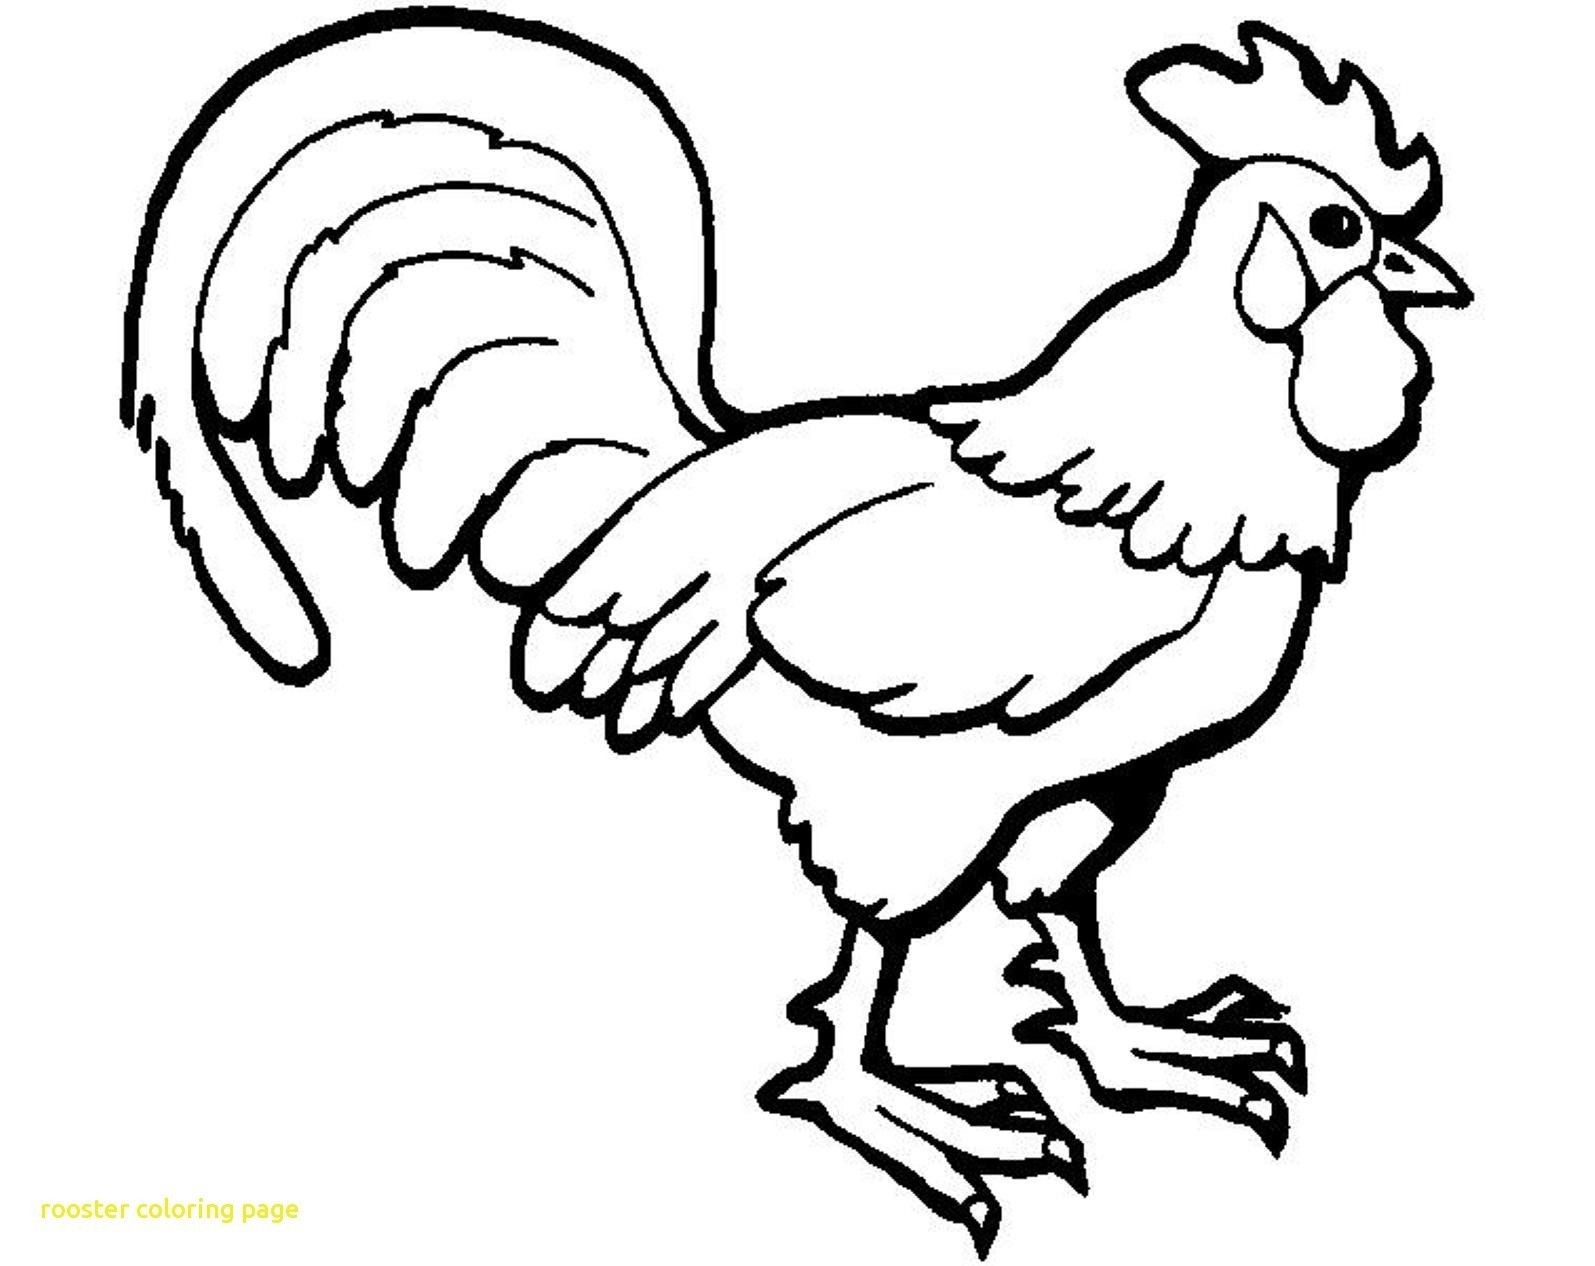 Brilliant photo of rooster coloring page